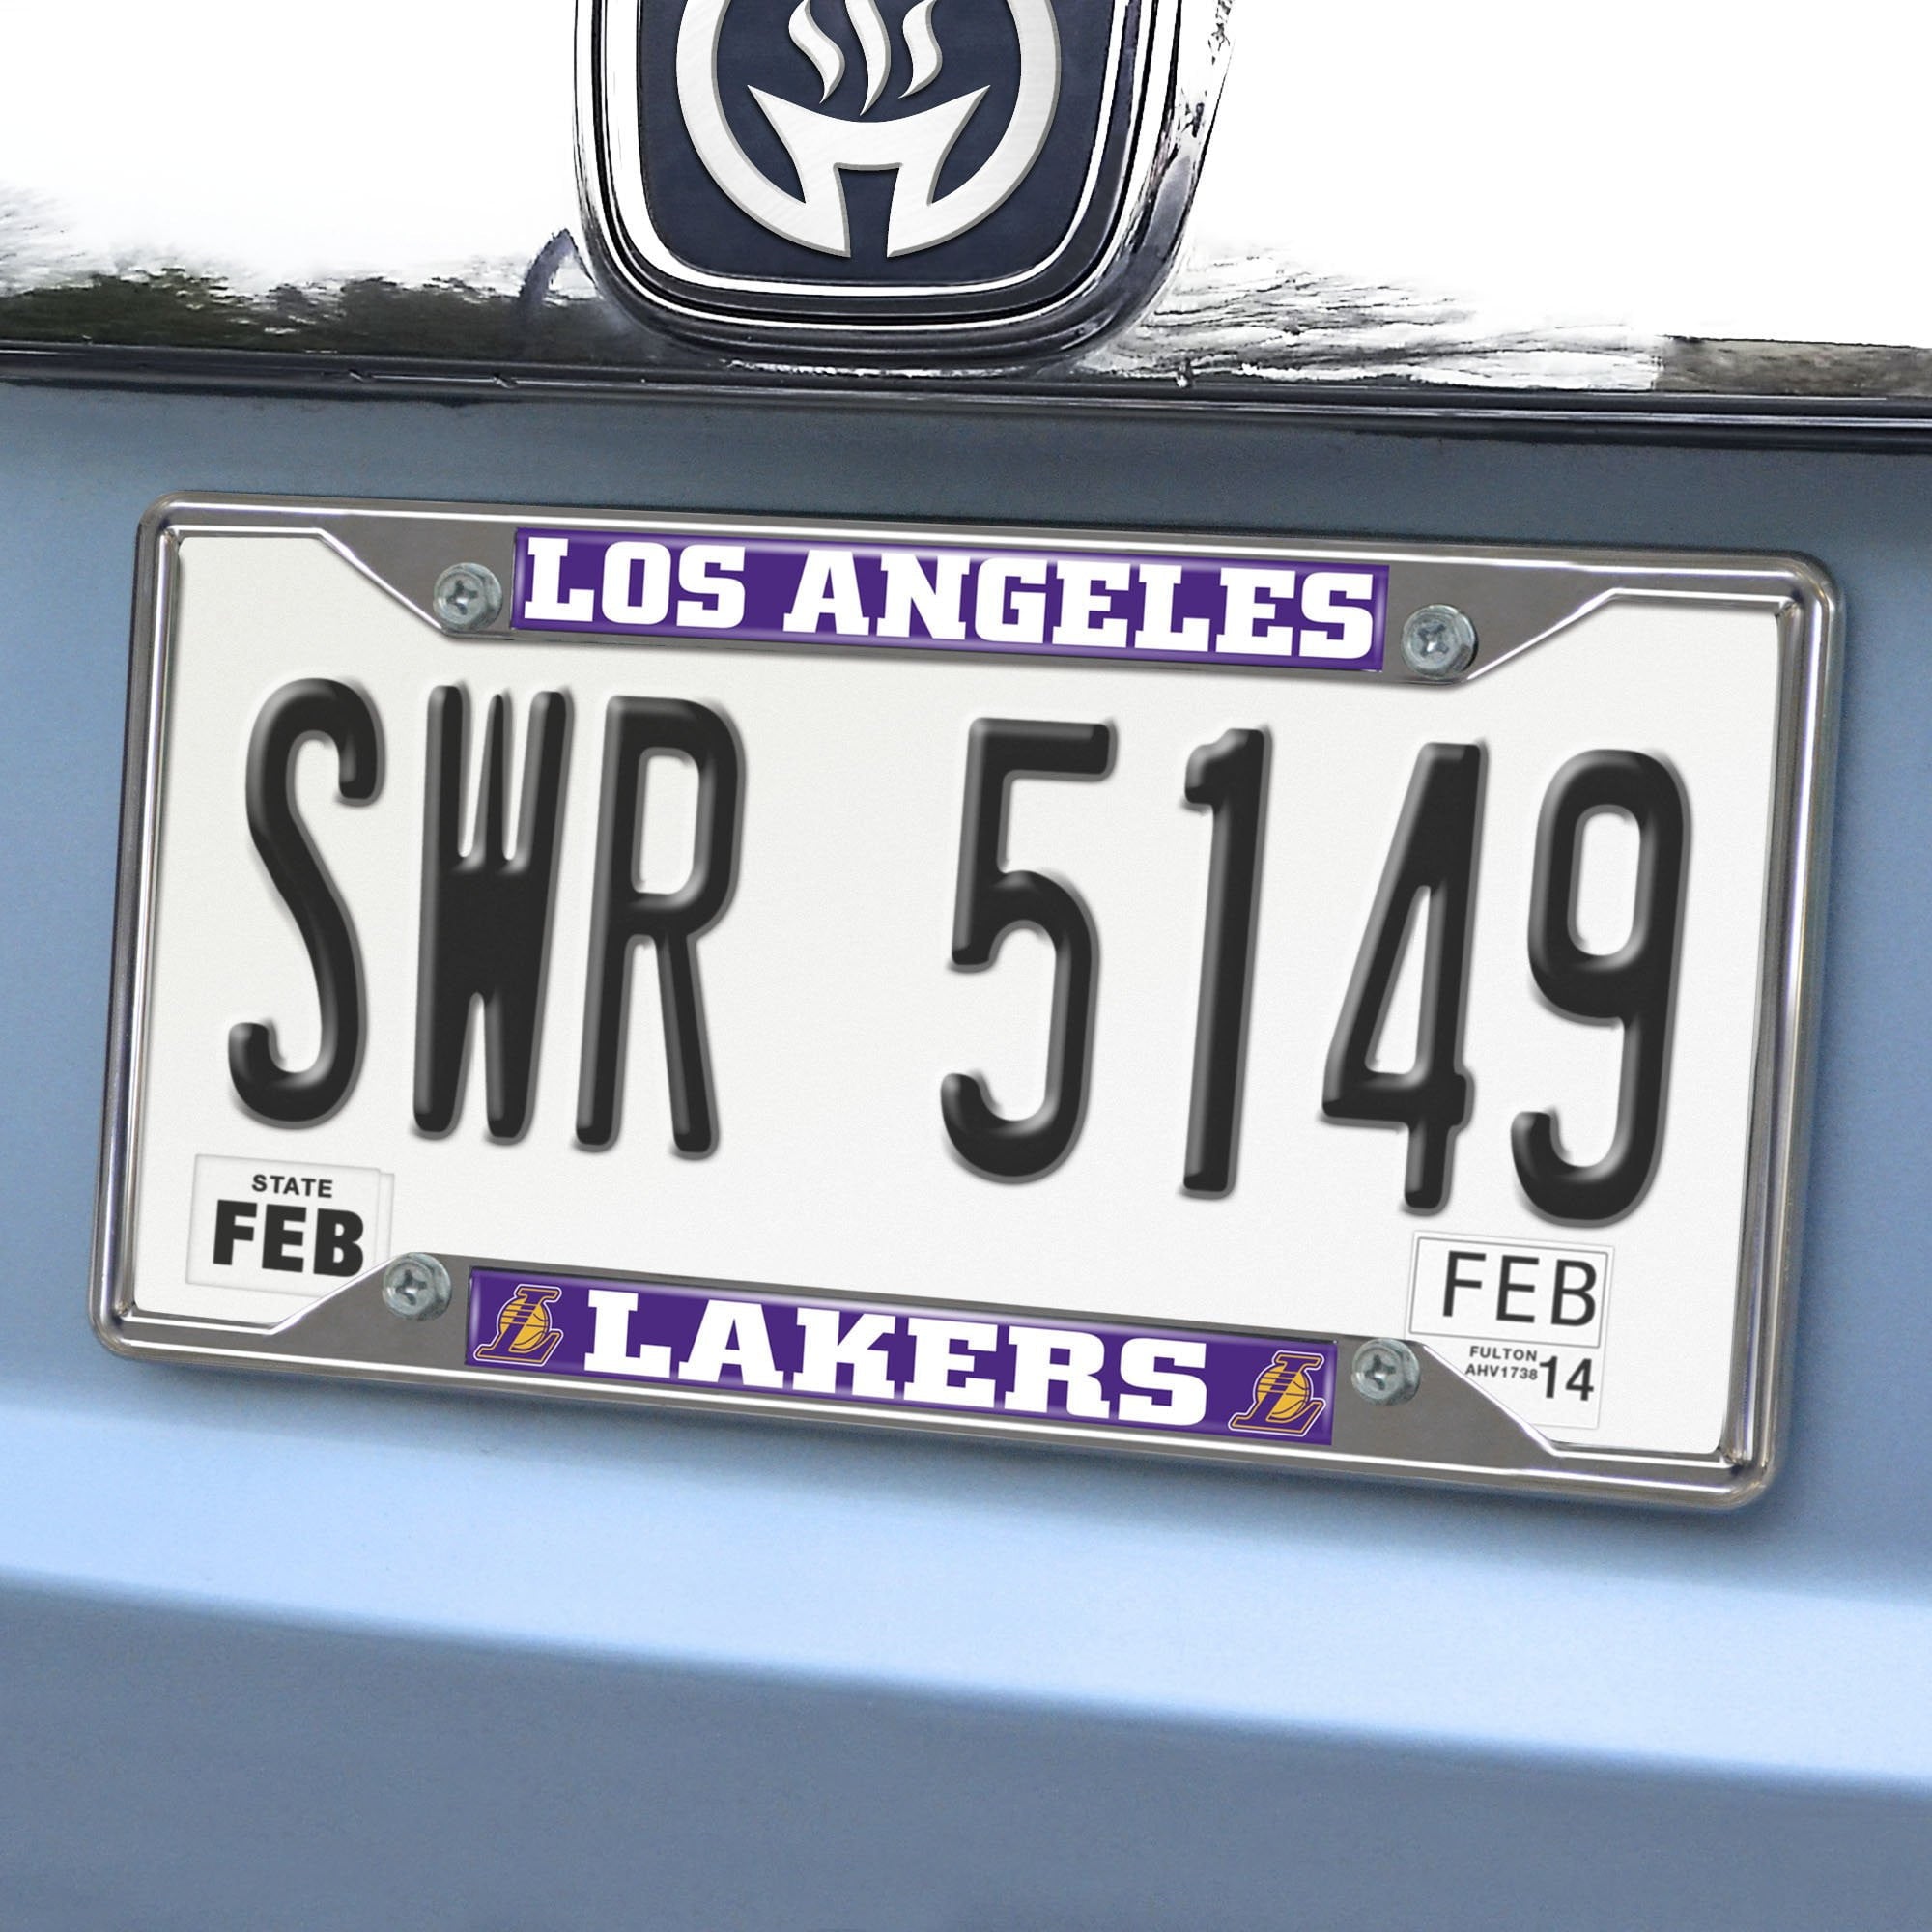 NBA - Los Angeles Lakers License Plate Frame